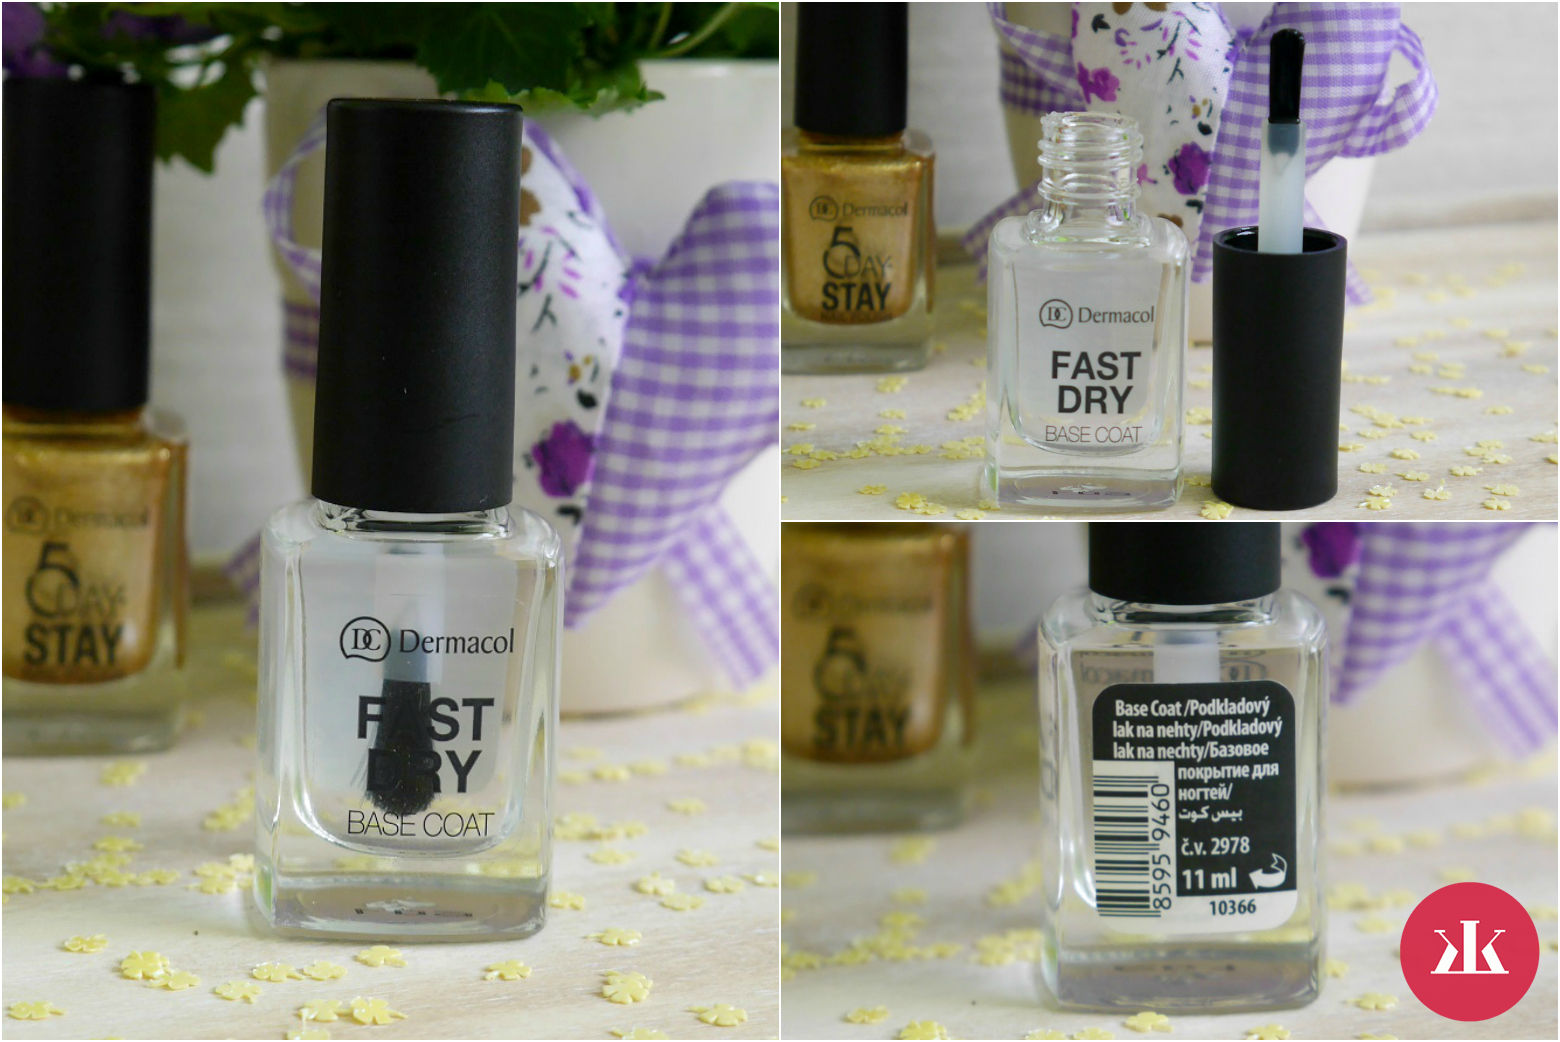 Dermacol 5 Day Stay Longlasting nail polish & Fast Dry Base Coat